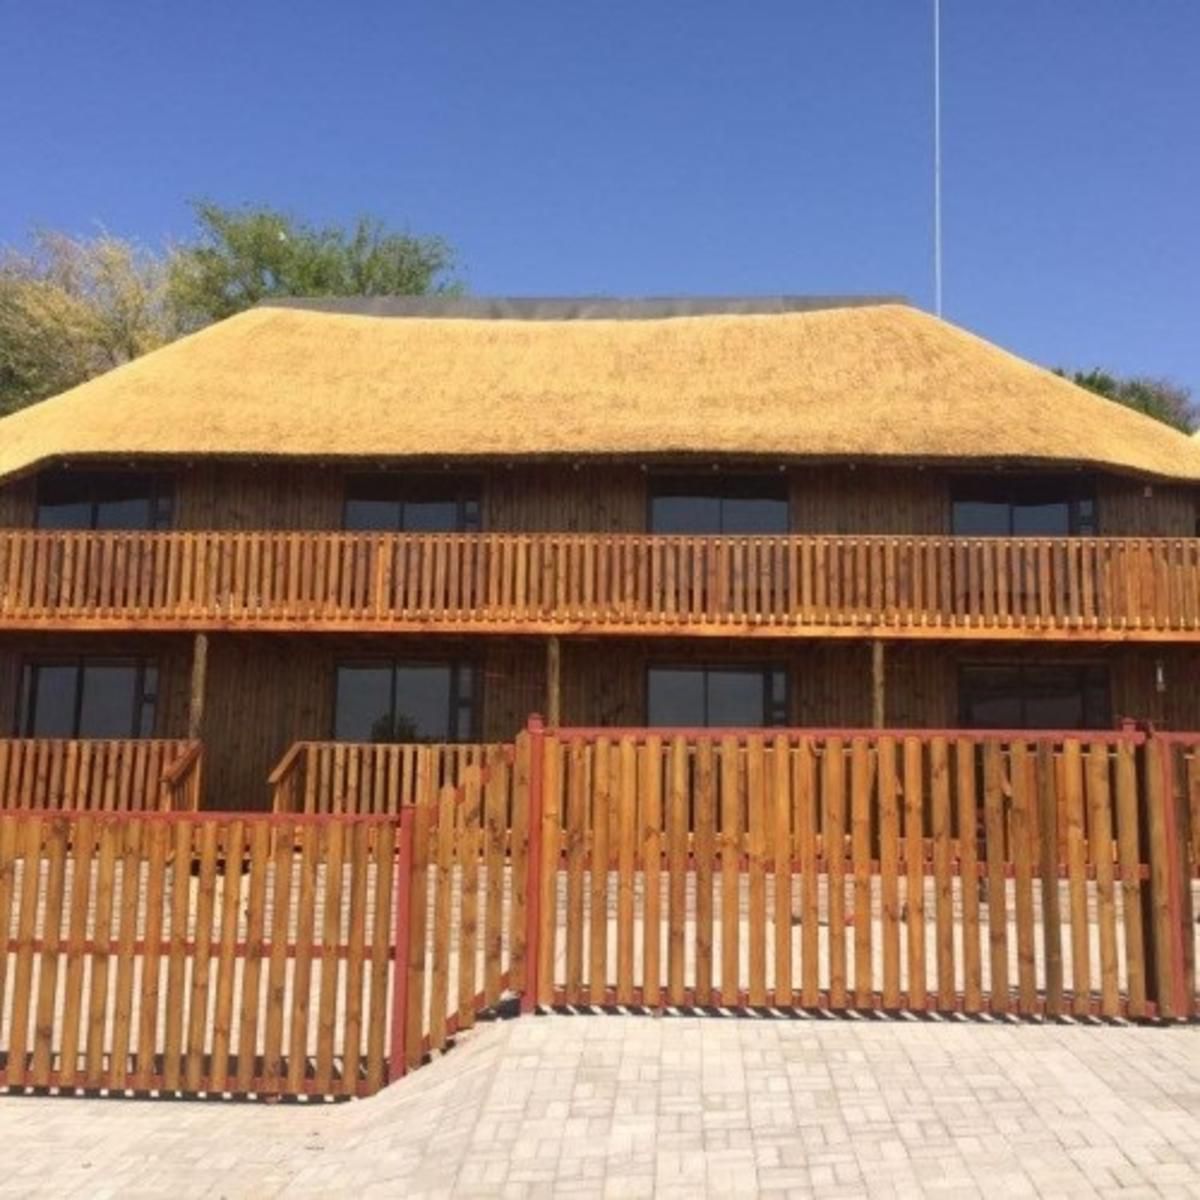 Kalahari Lion S Rest Upington Northern Cape South Africa Complementary Colors, Building, Architecture